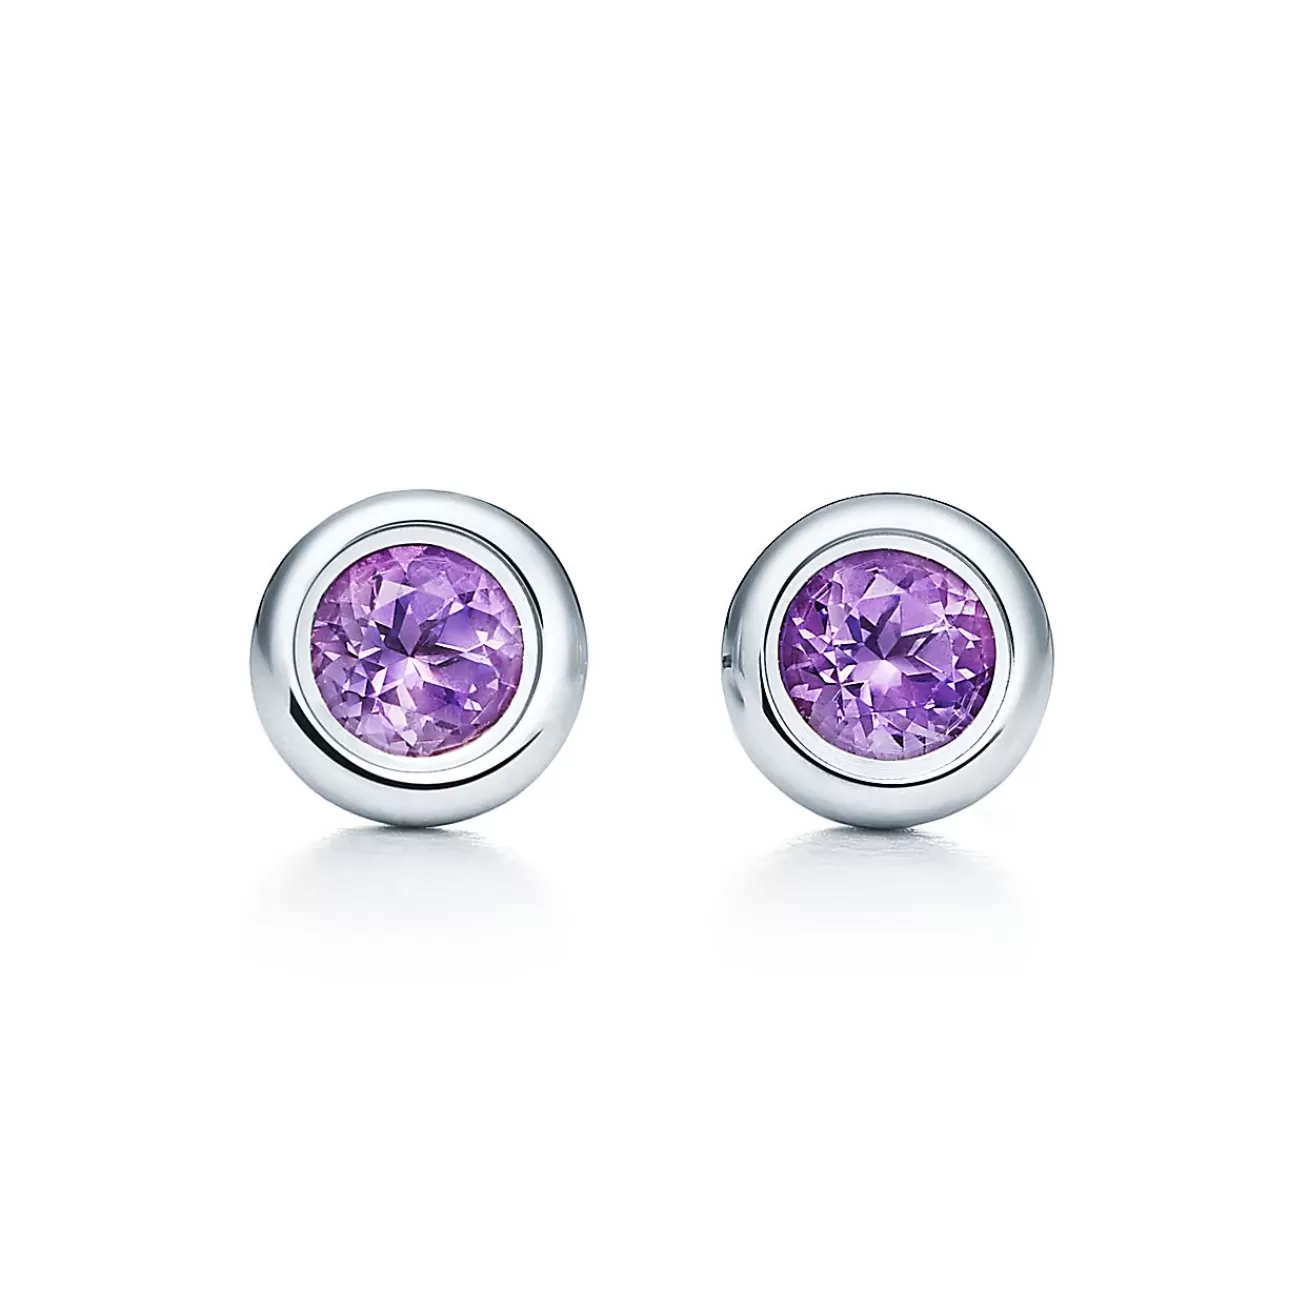 Tiffany & Co. Elsa Peretti® Color by the Yard earrings in sterling silver with amethysts. | ^ Earrings | Sterling Silver Jewelry